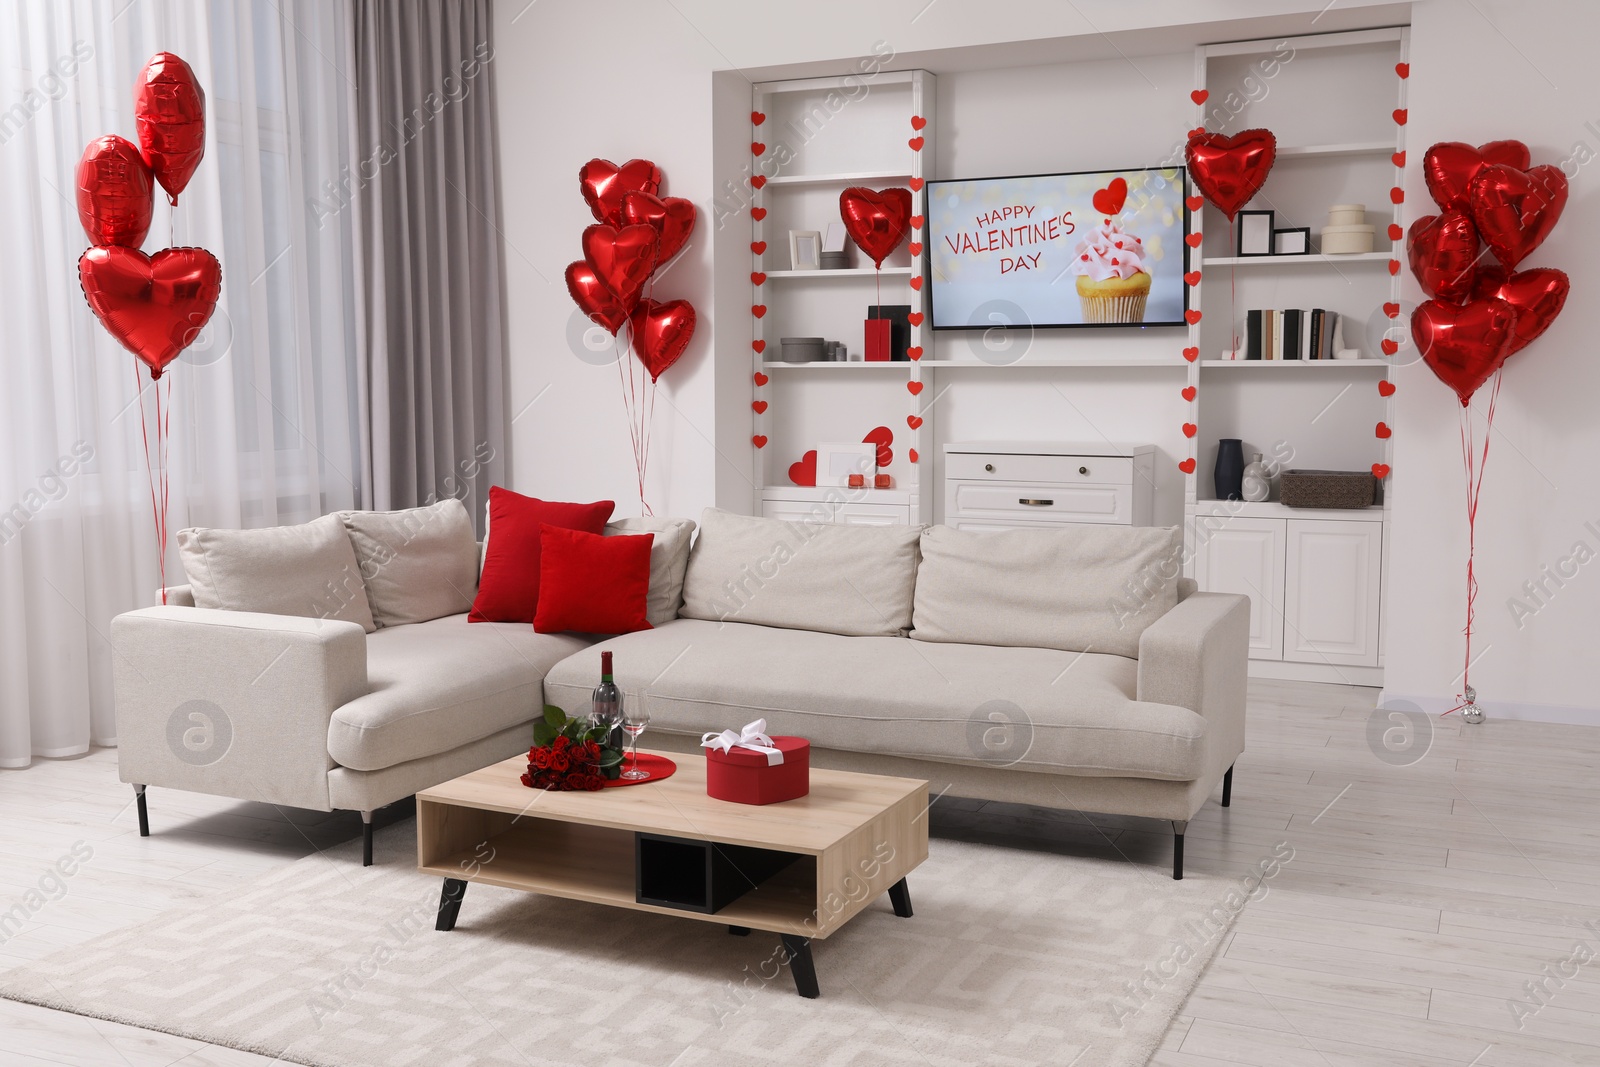 Photo of Cozy living room interior decorated for Valentine Day